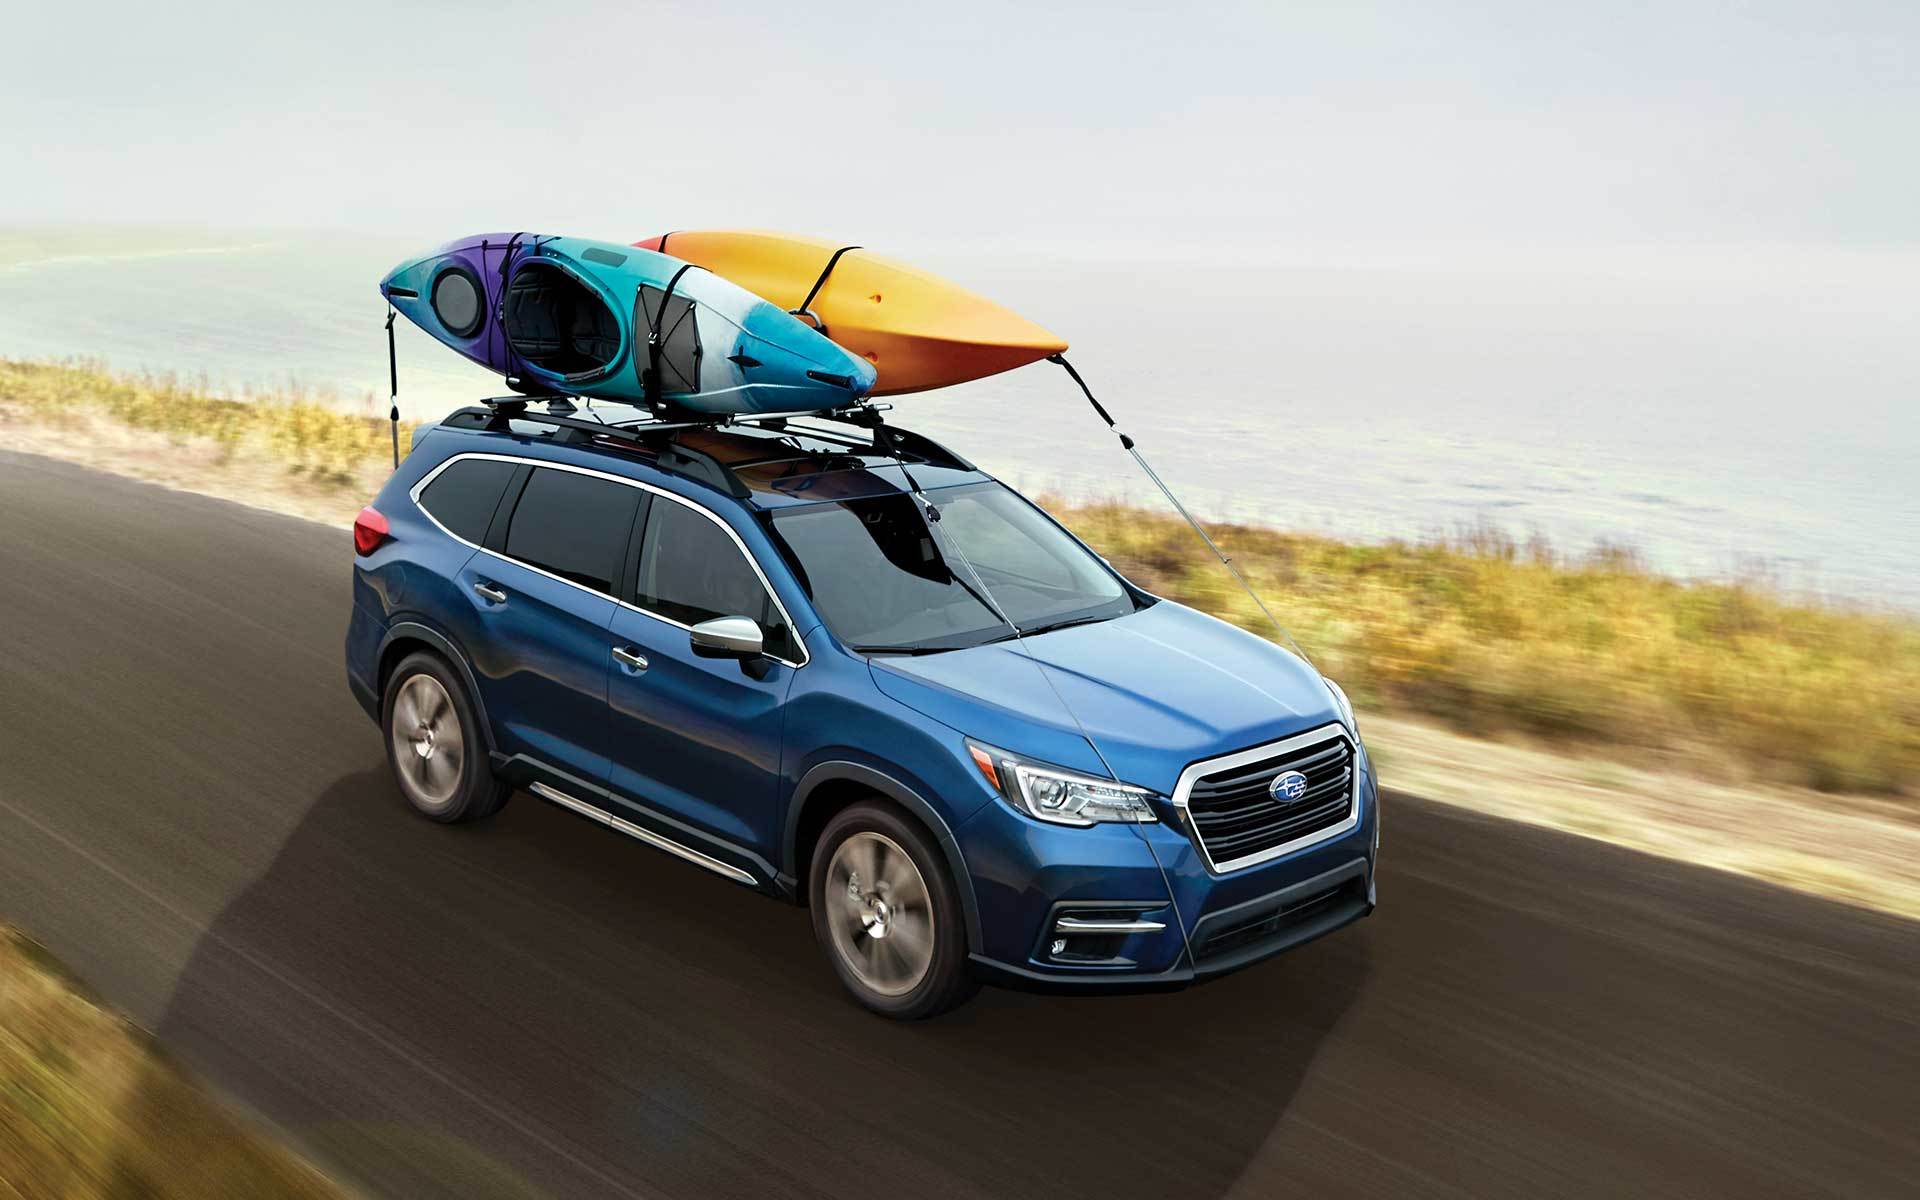 The Subaru Ascent demonstrates its utility as a three-row SUV.